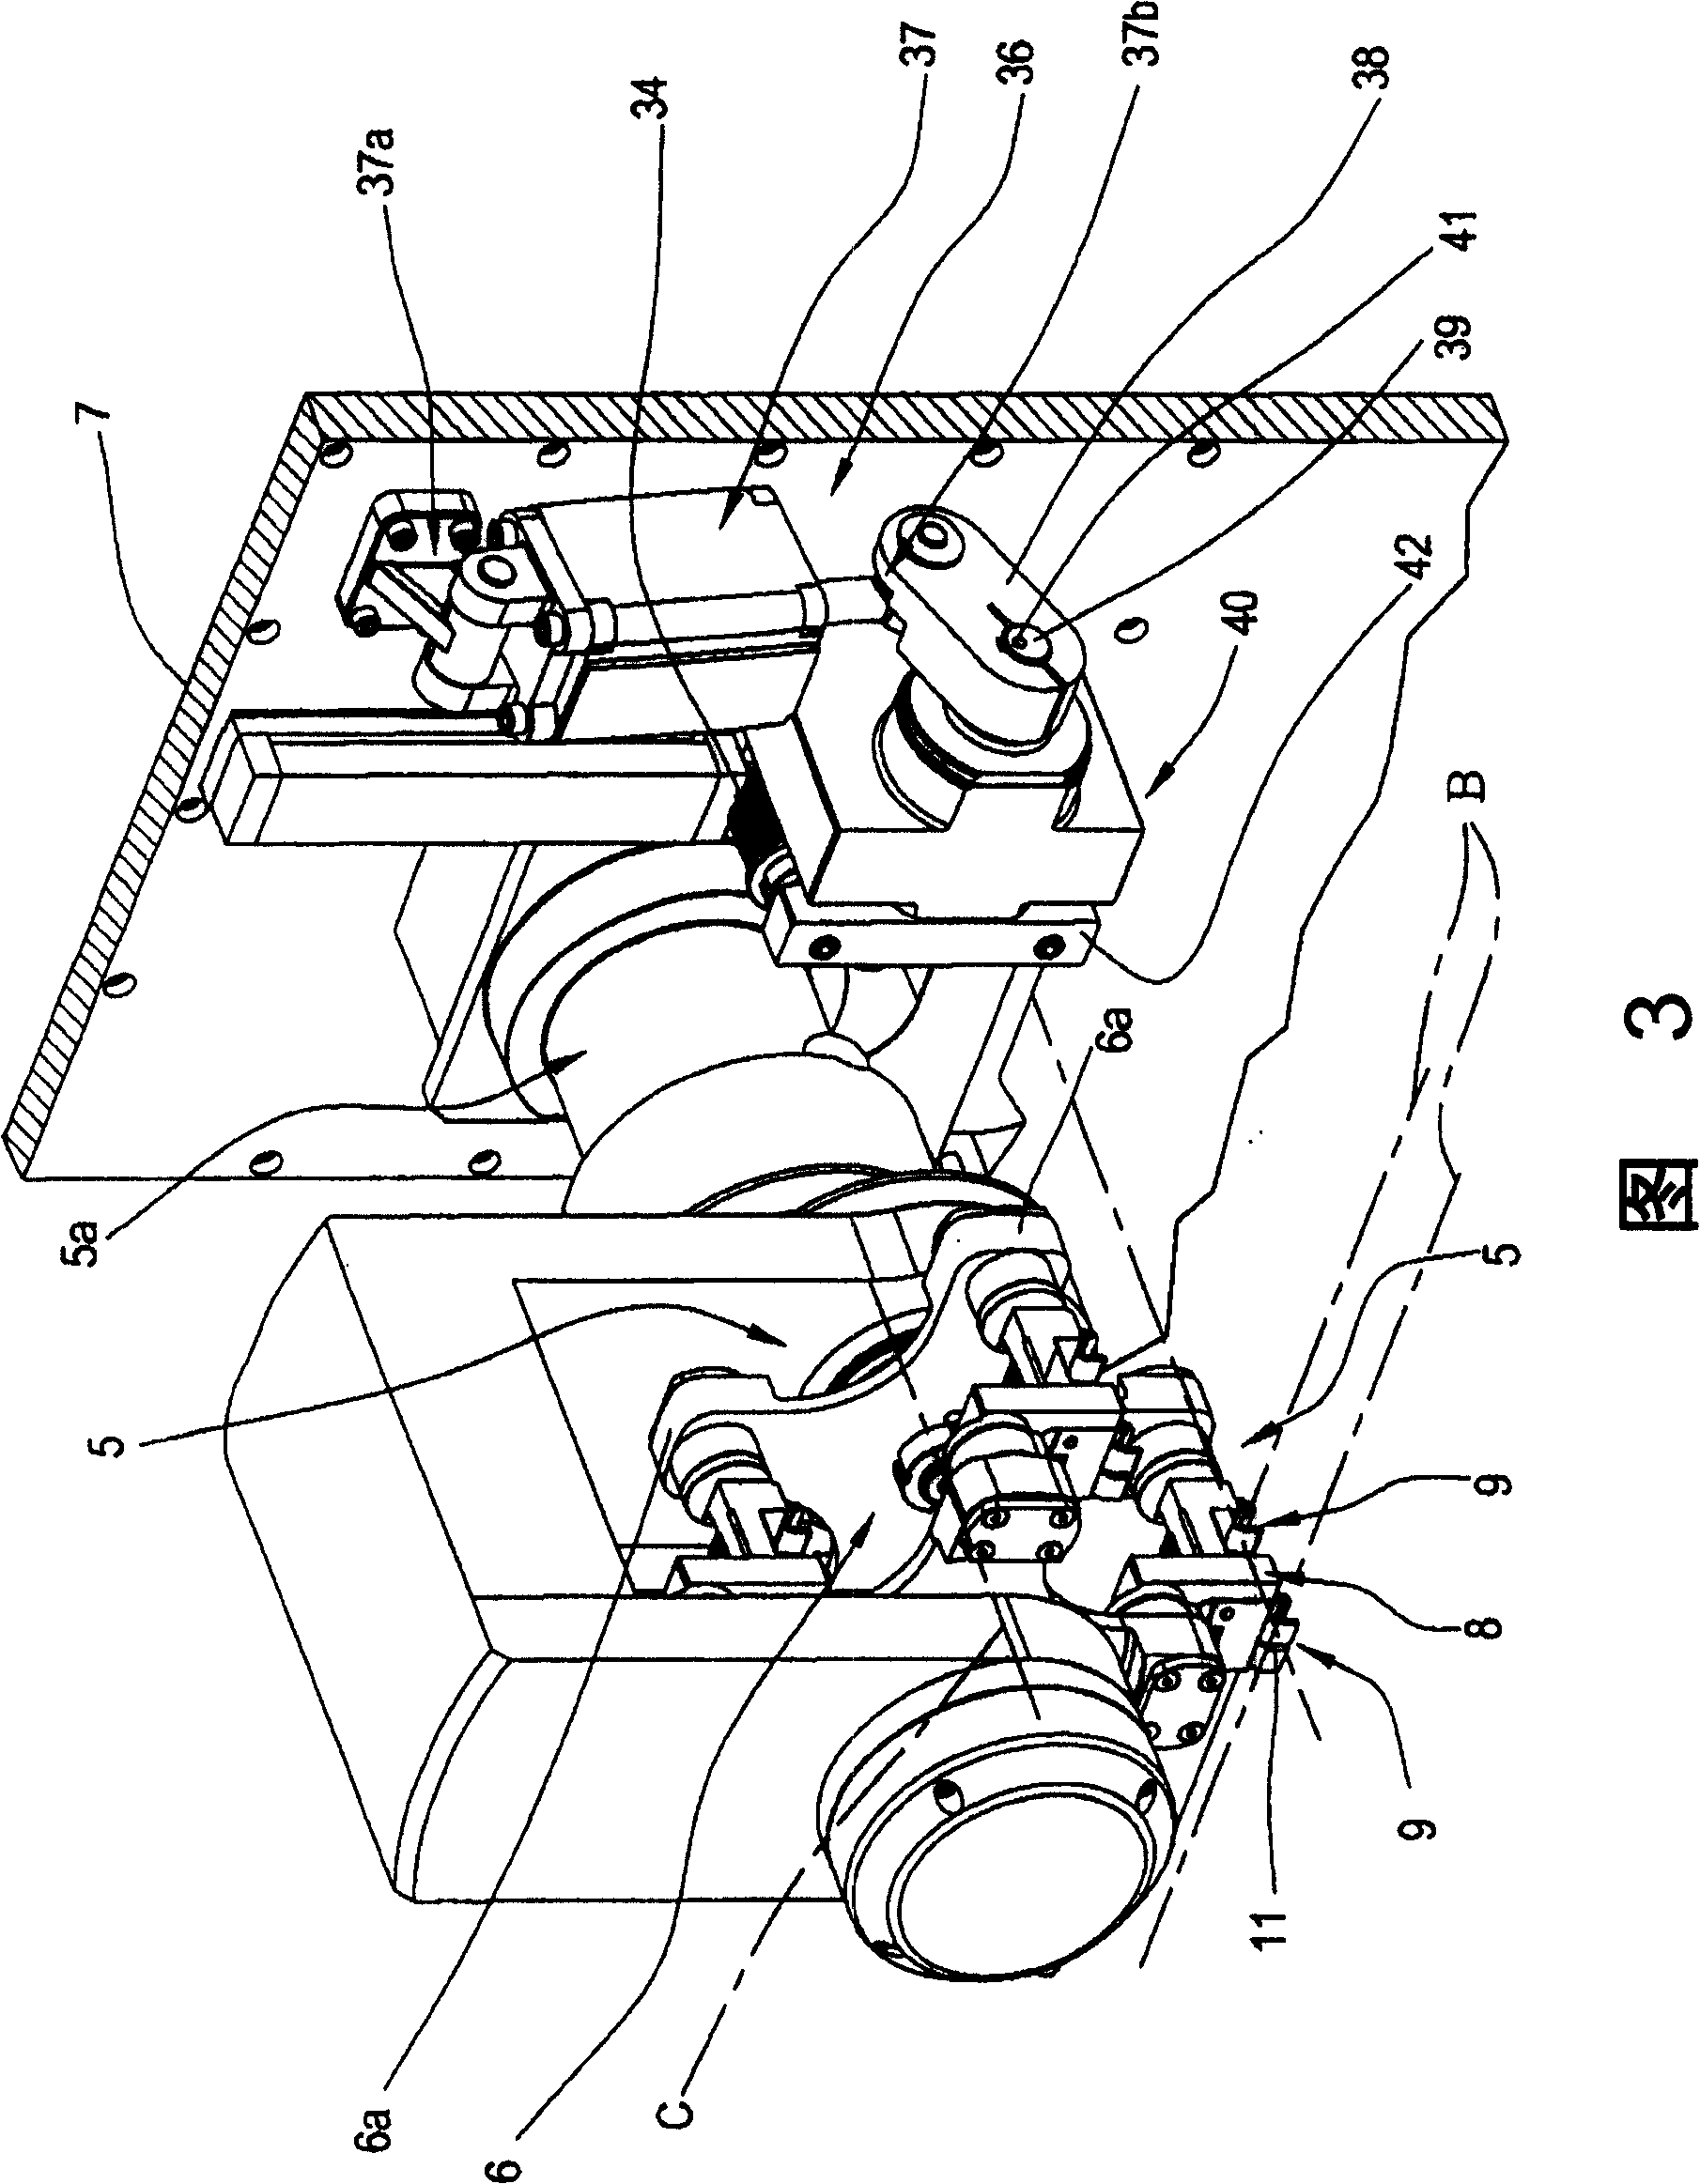 A cutter device for tobacco products